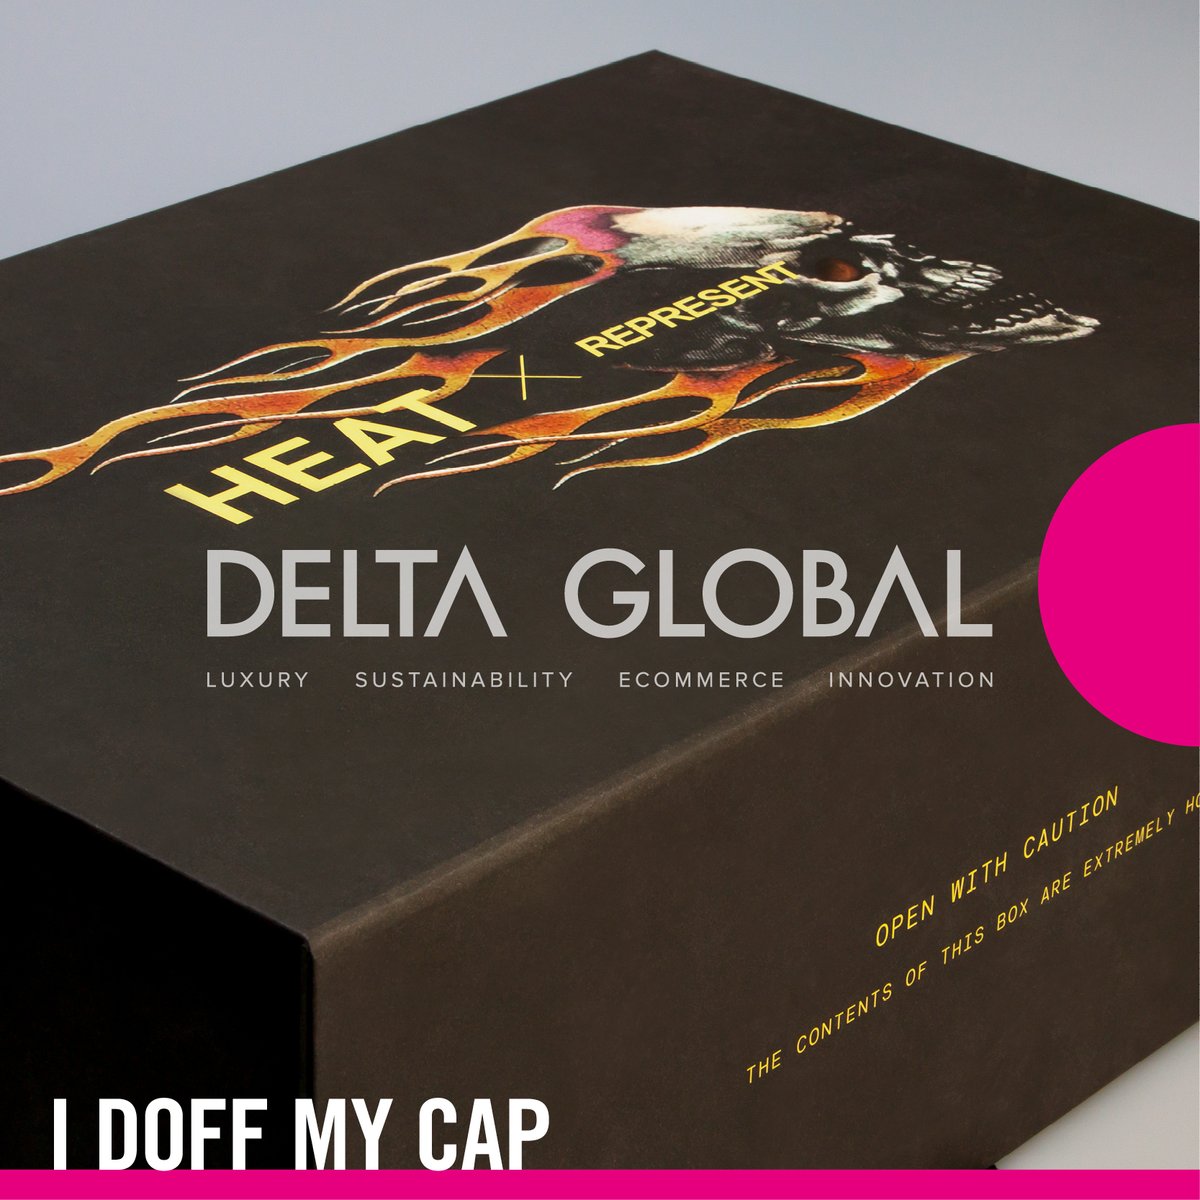 This week's #IDoffMyCap goes to @BoxofHeat. Heat has made luxury items more accessible to a younger generation and their efforts towards sustainability are admirable, from their @WeRDeltaGlobal packaging, to tackling the issue of waste. Find out more: bit.ly/3aOcTIZ